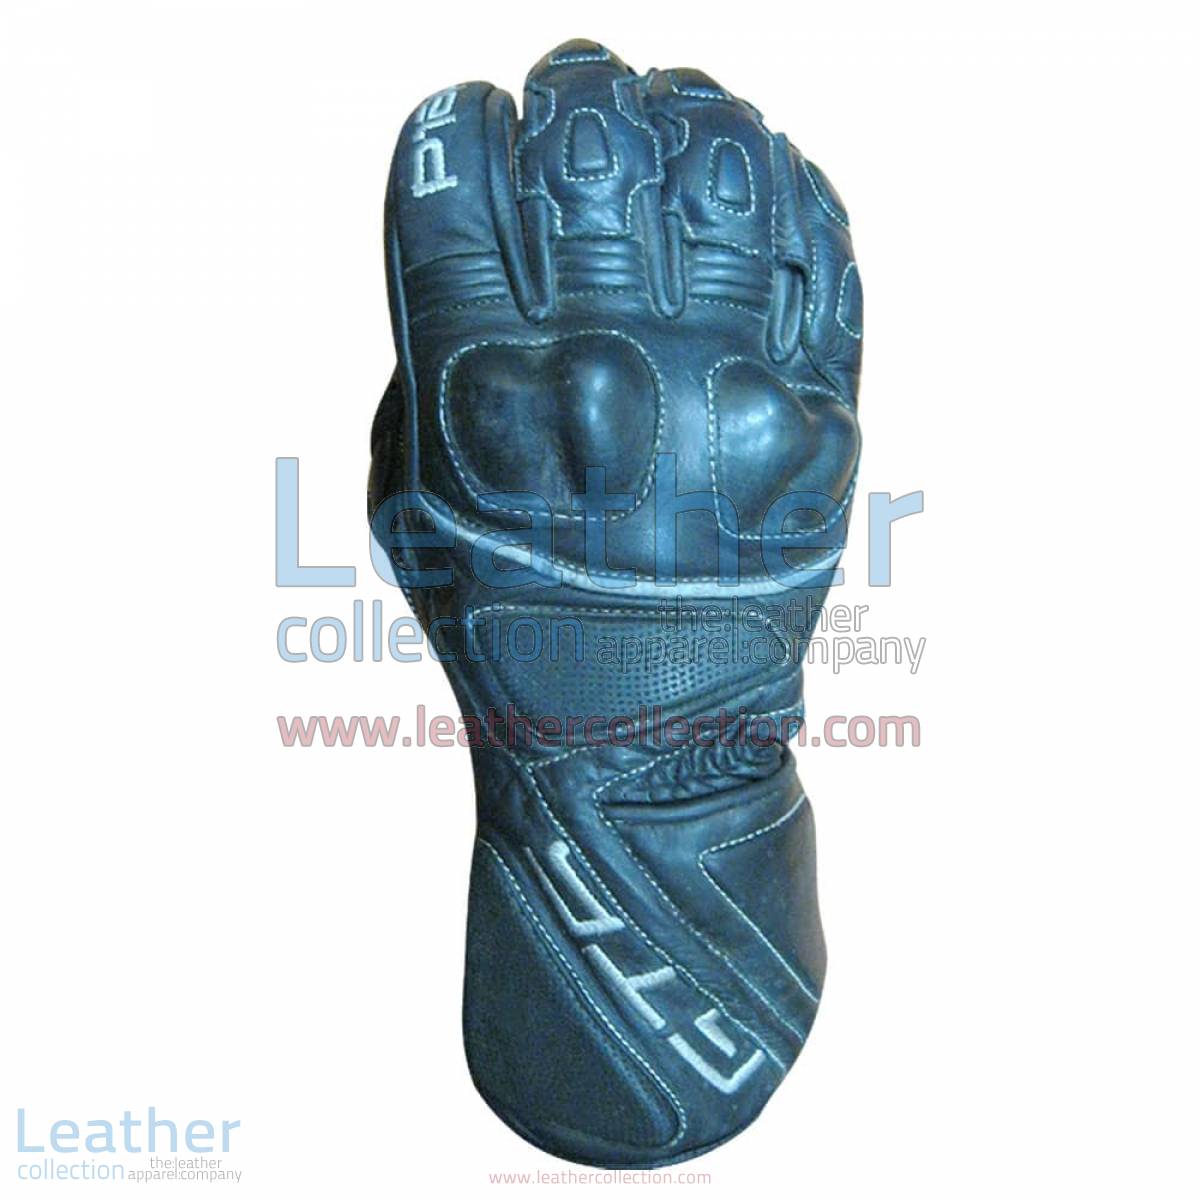 Titan Leather Racing Gloves | leather racing gloves